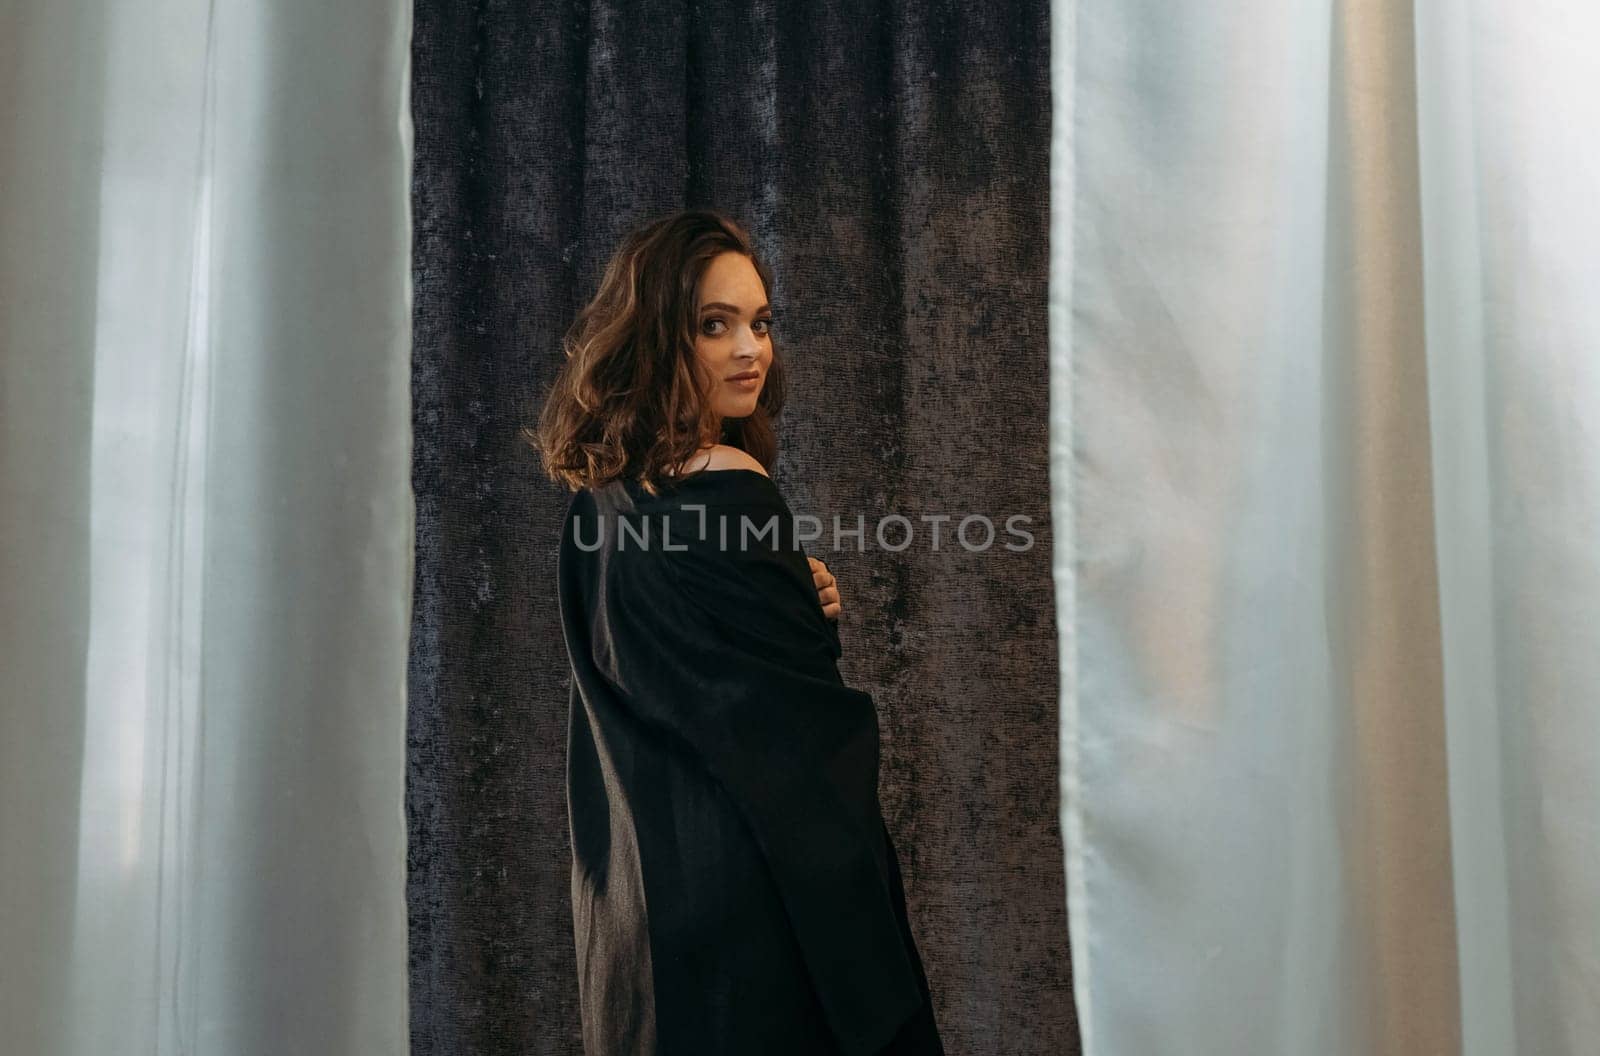 A woman standing in front of a closed curtain, her silhouette visible against the fabric.